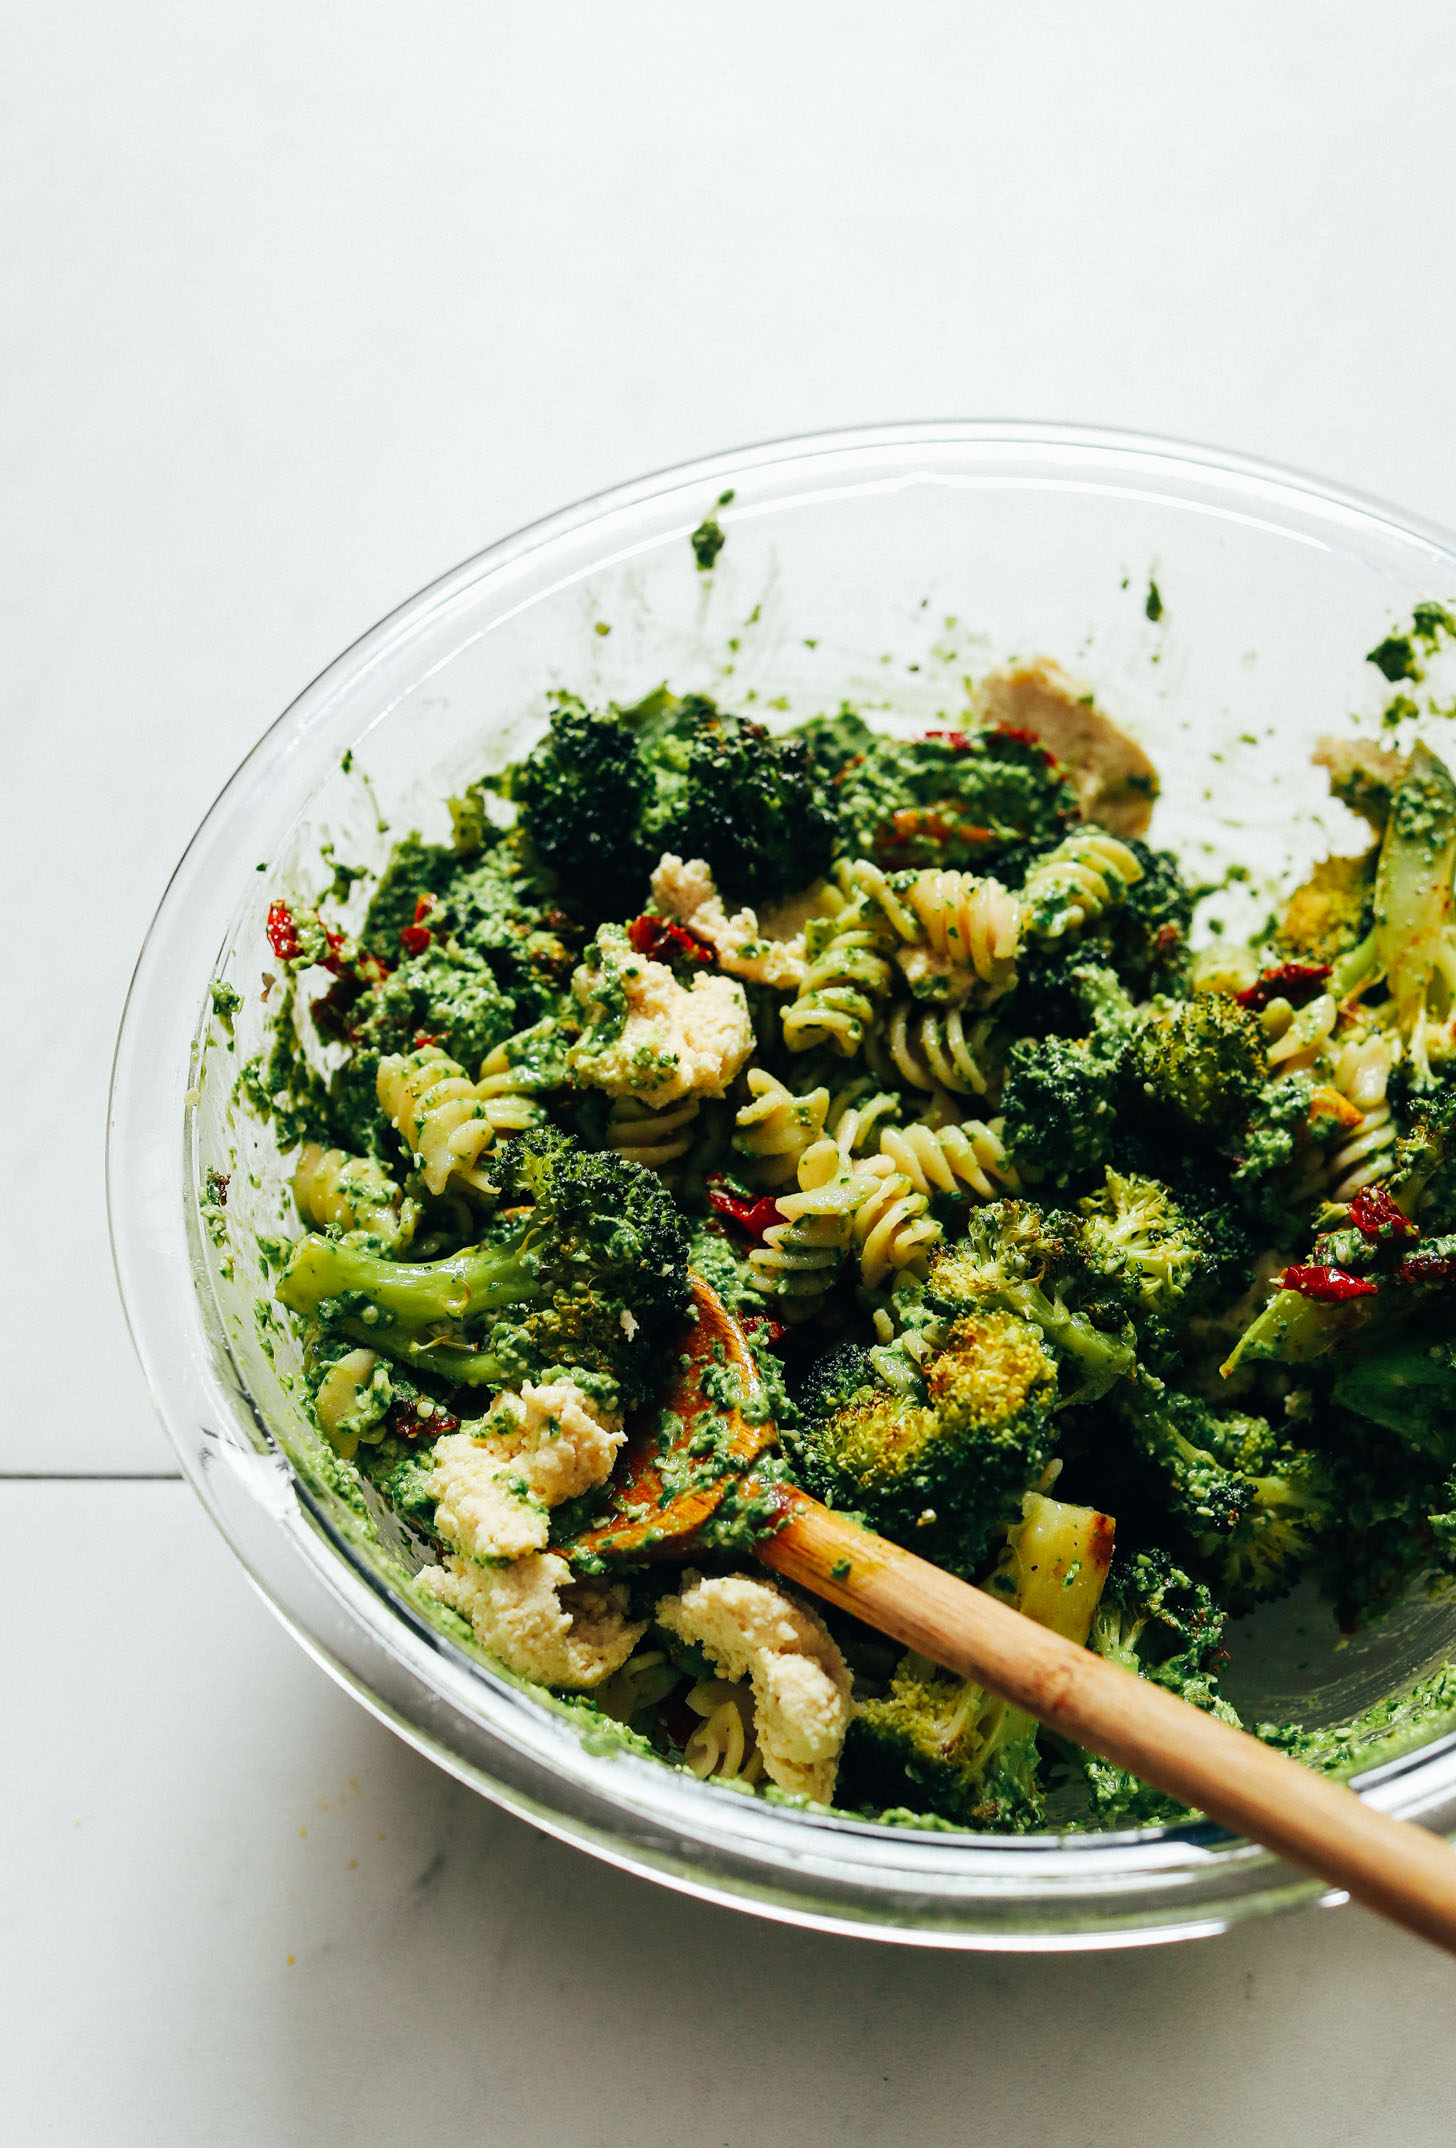 Bowl of pasta salad made with roasted broccoli